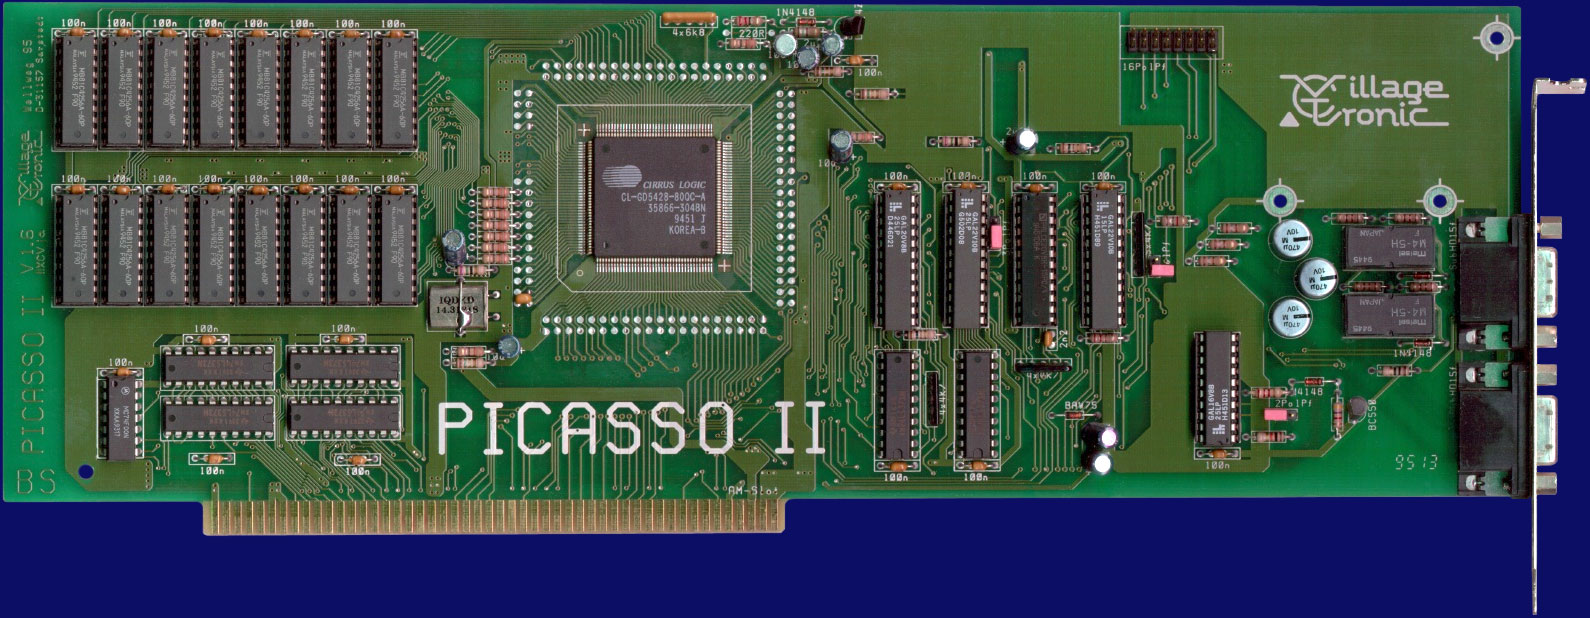 Village Tronic Picasso II - Rev 1.6, front side